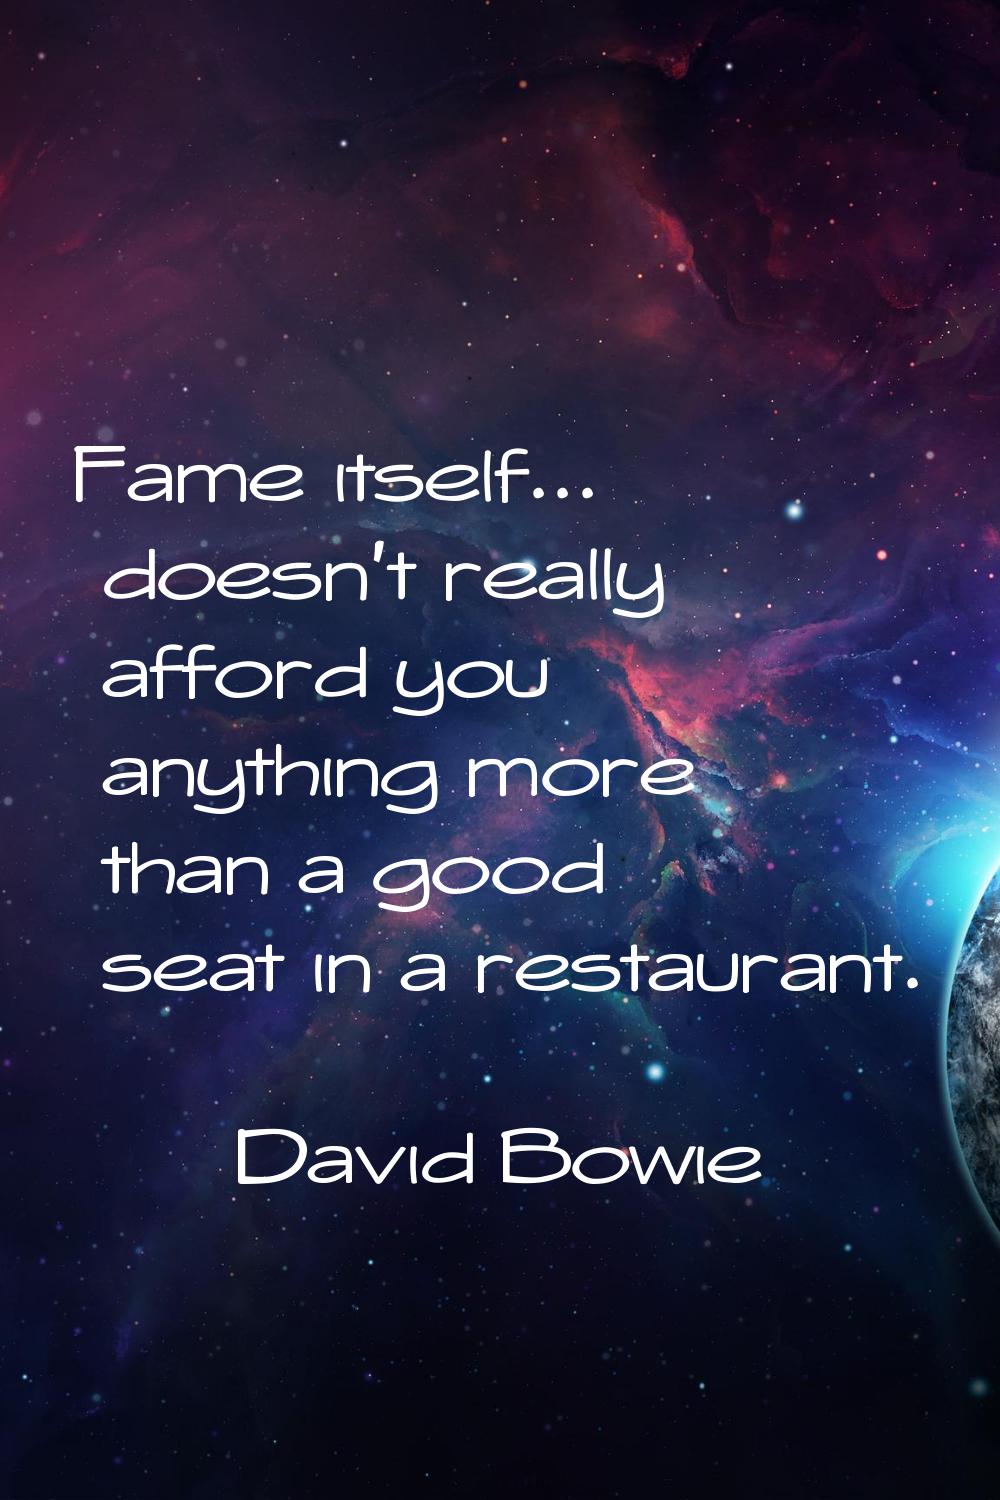 Fame itself... doesn't really afford you anything more than a good seat in a restaurant.